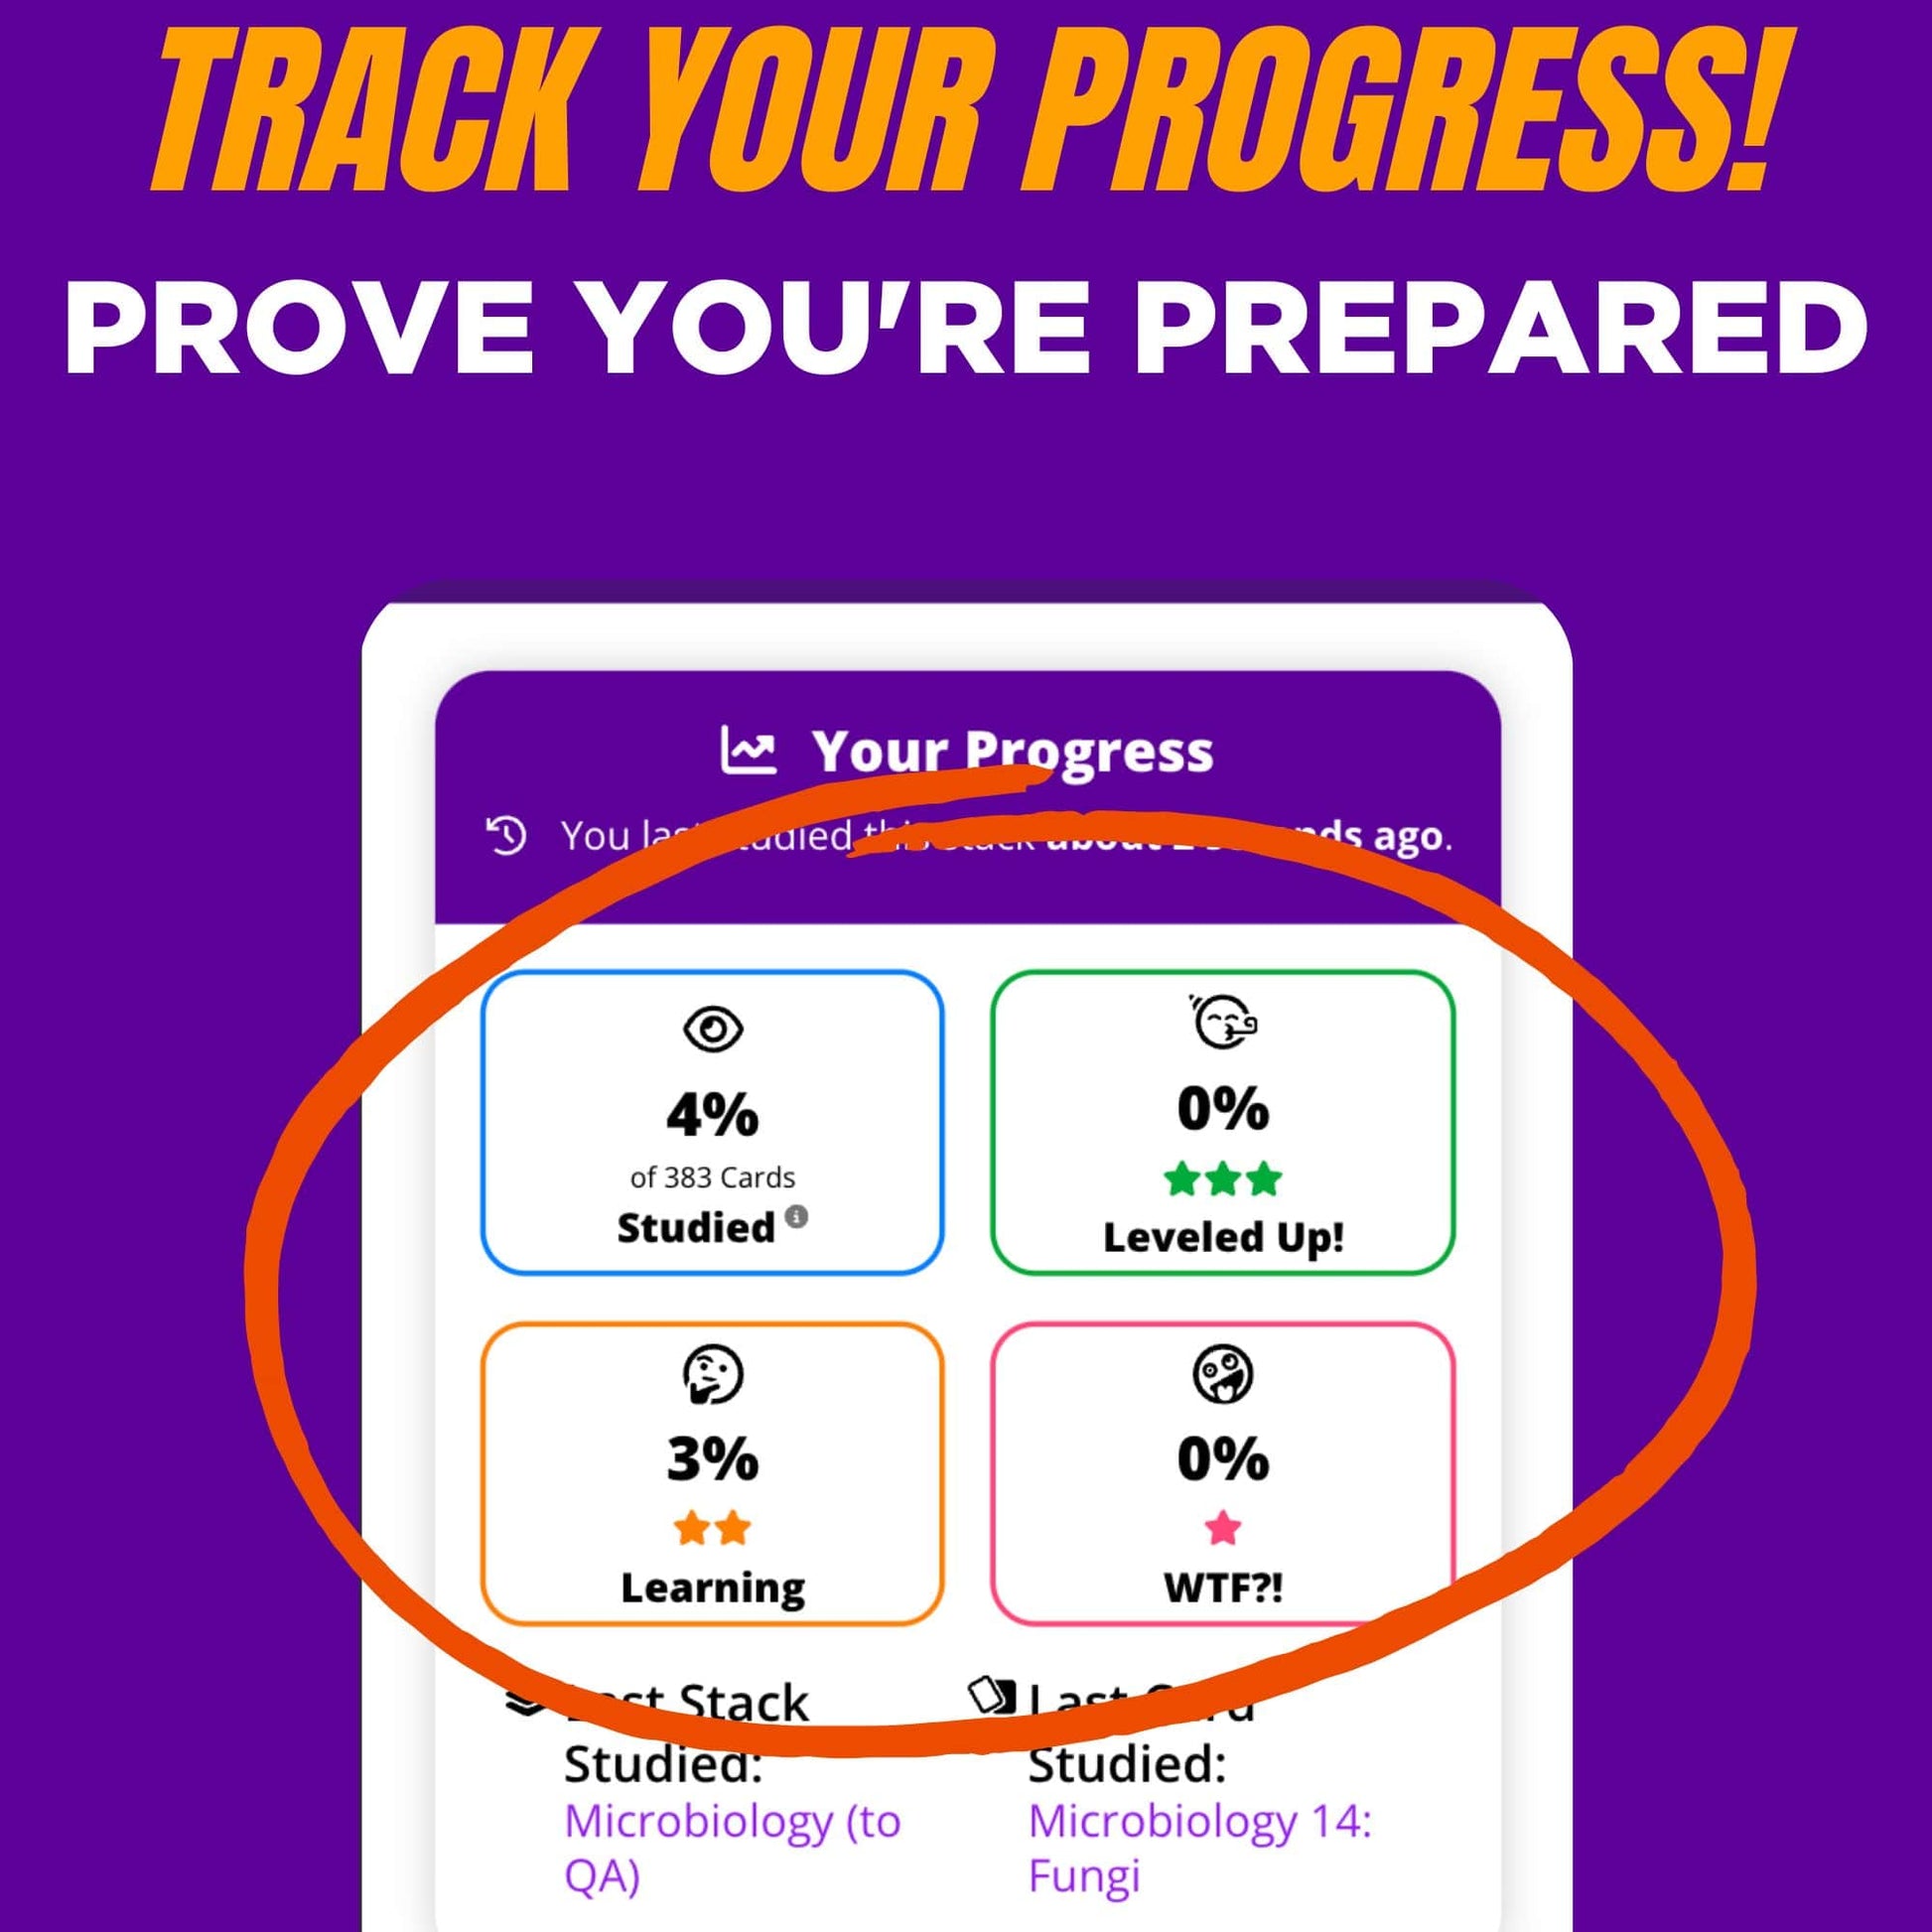 track your progress and prove you've prepared